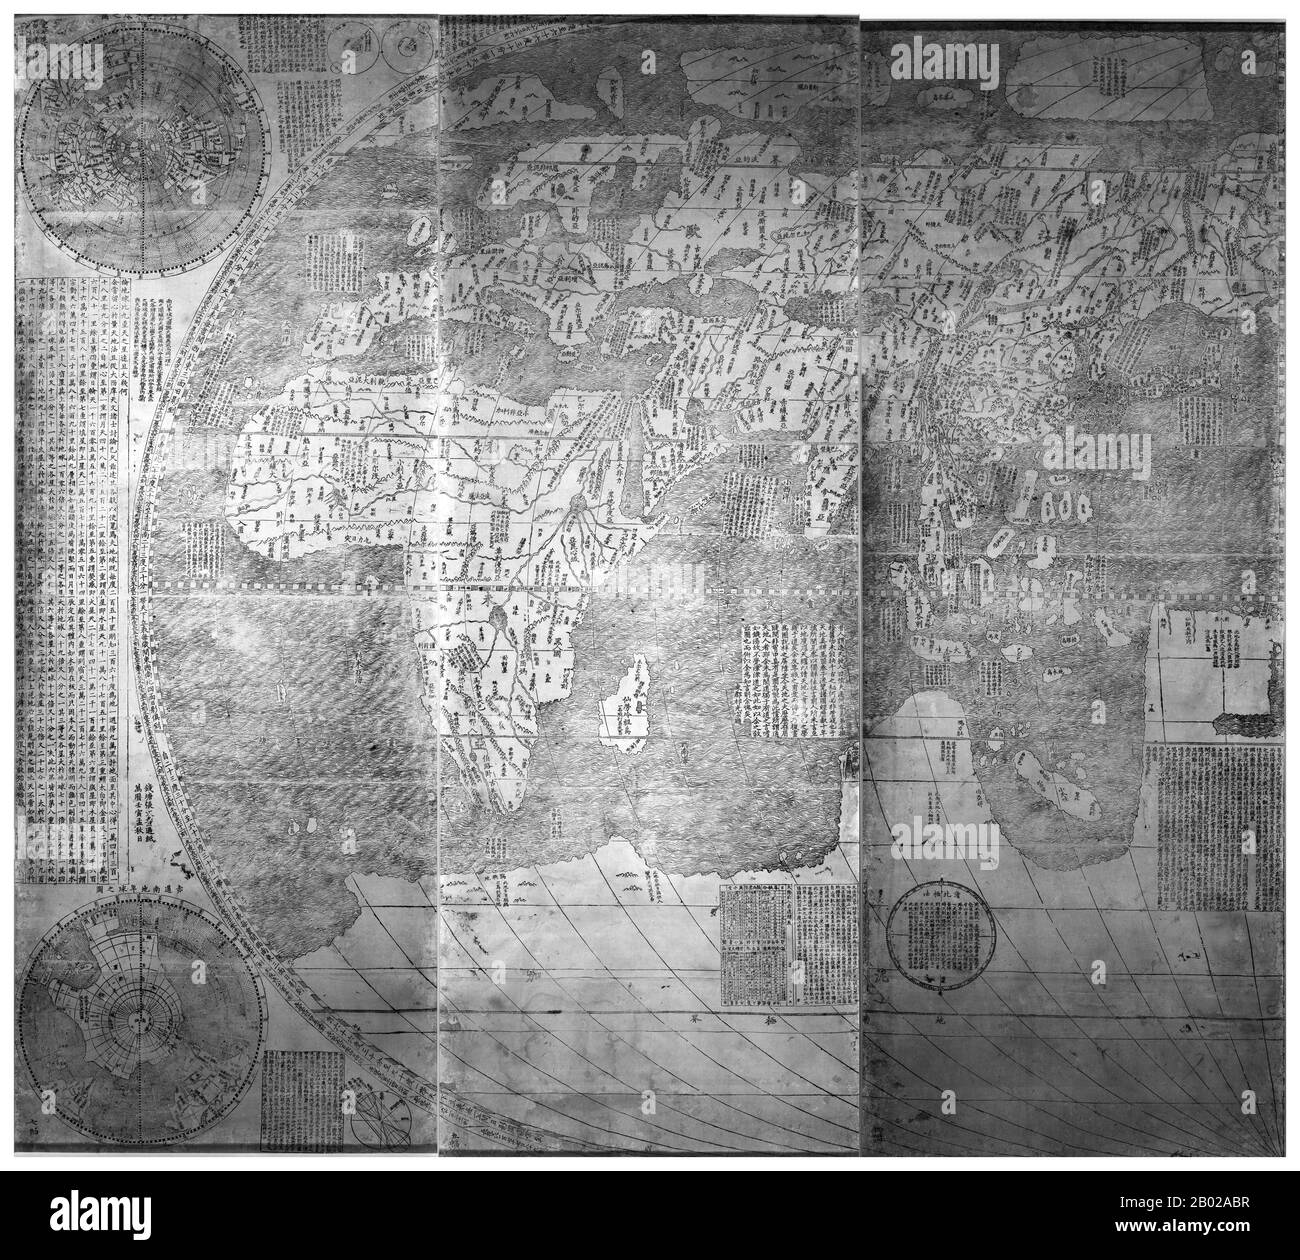 Kunyu Wanguo Quantu (坤輿萬國全圖) was printed by Matteo Ricci upon request of Wanli Emperor in Beijing, 1602. Ricci's Chinese collaborators were Zhong Wentao and Li Zhizao.  The map was crucial in expanding Chinese knowledge of the world. It was later exported to Japan and was influential there as well. Stock Photo